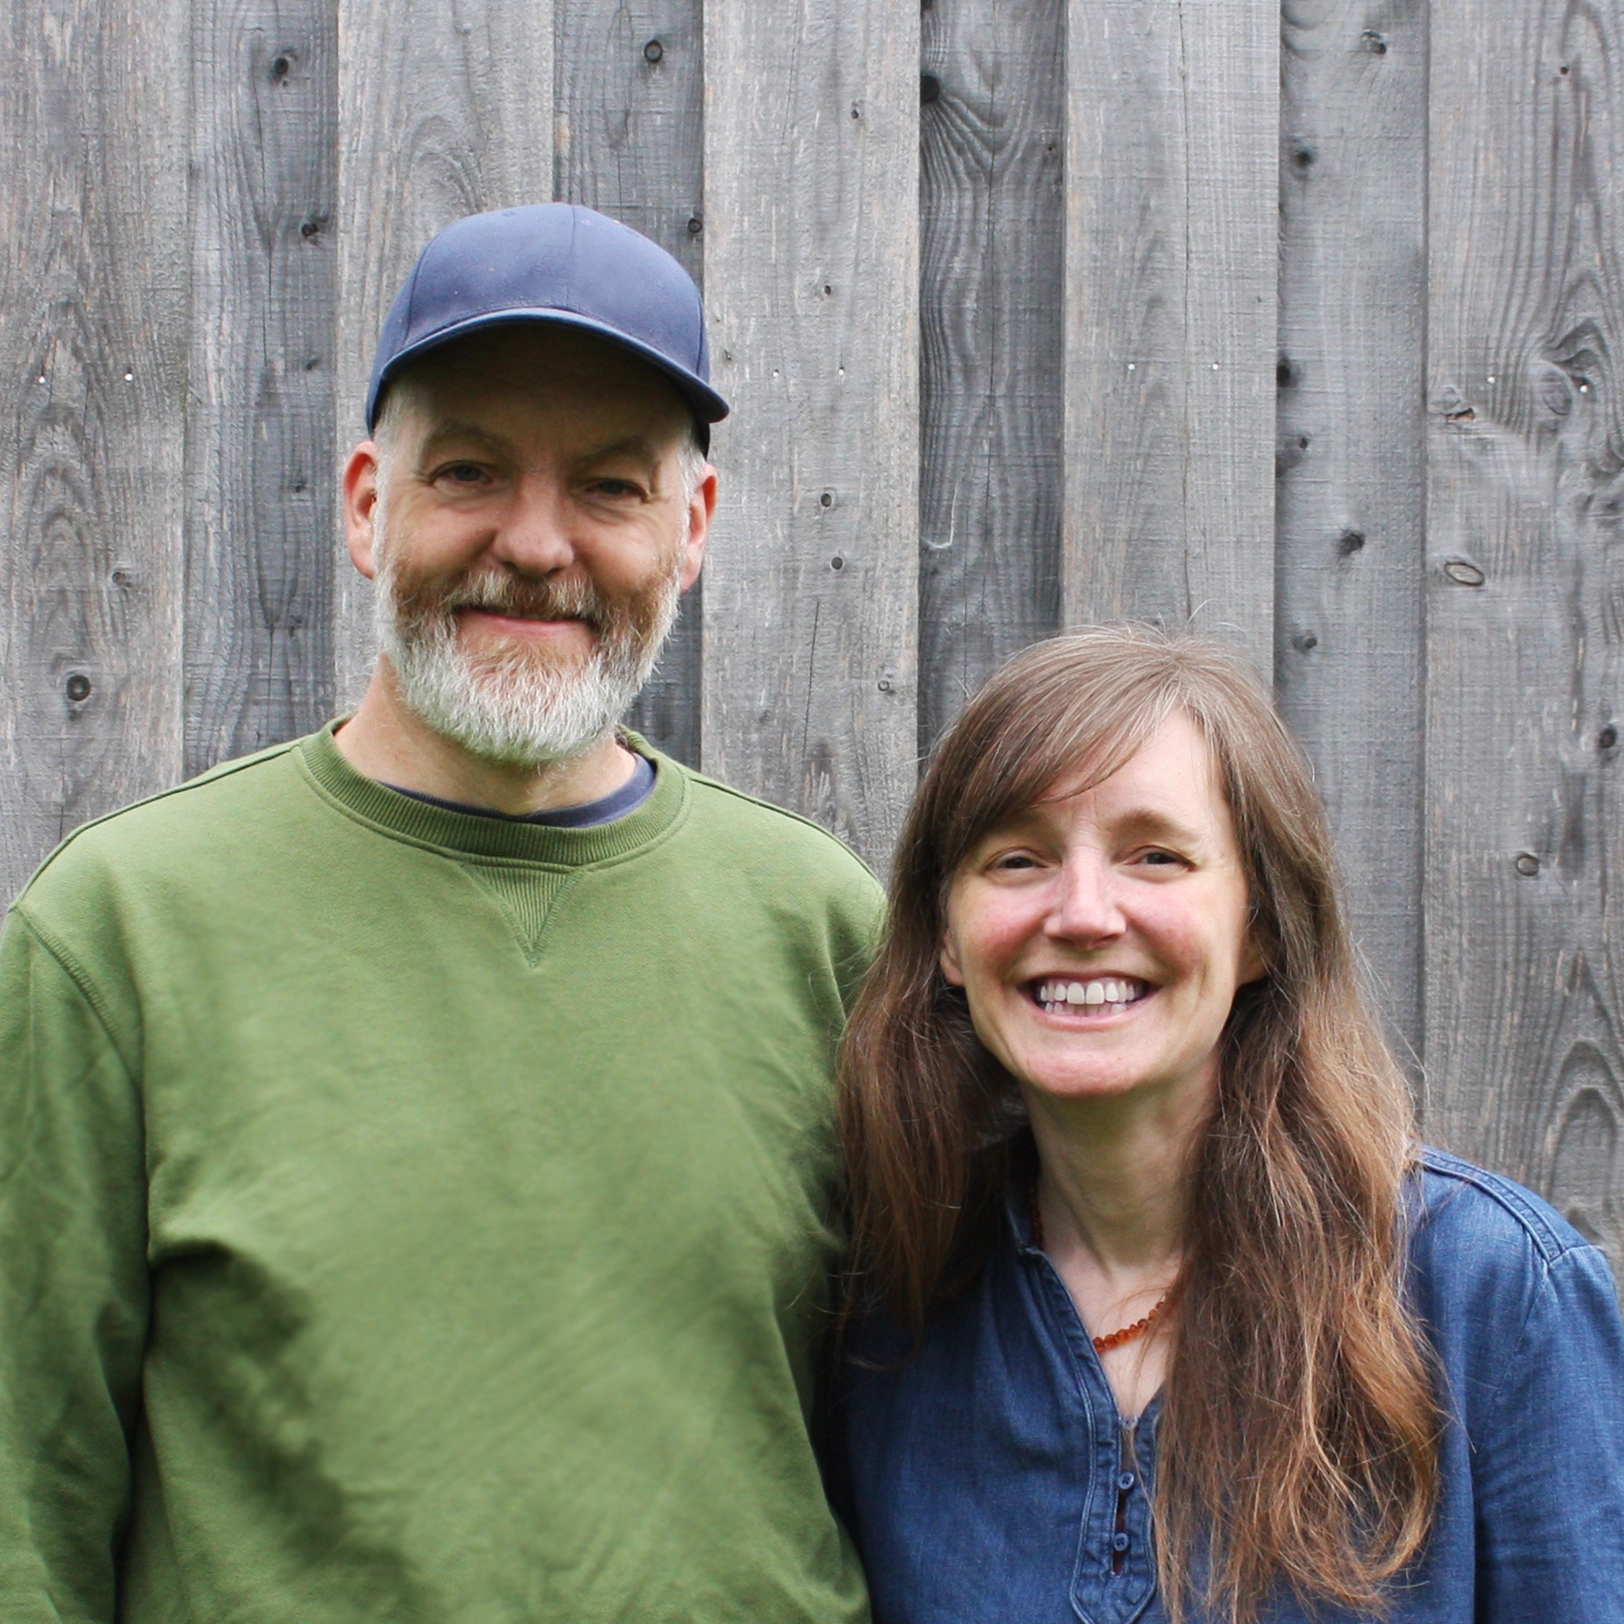 Rho Rho Illustration founders Thomas and Bridget Rhodes in front of wood clad wall